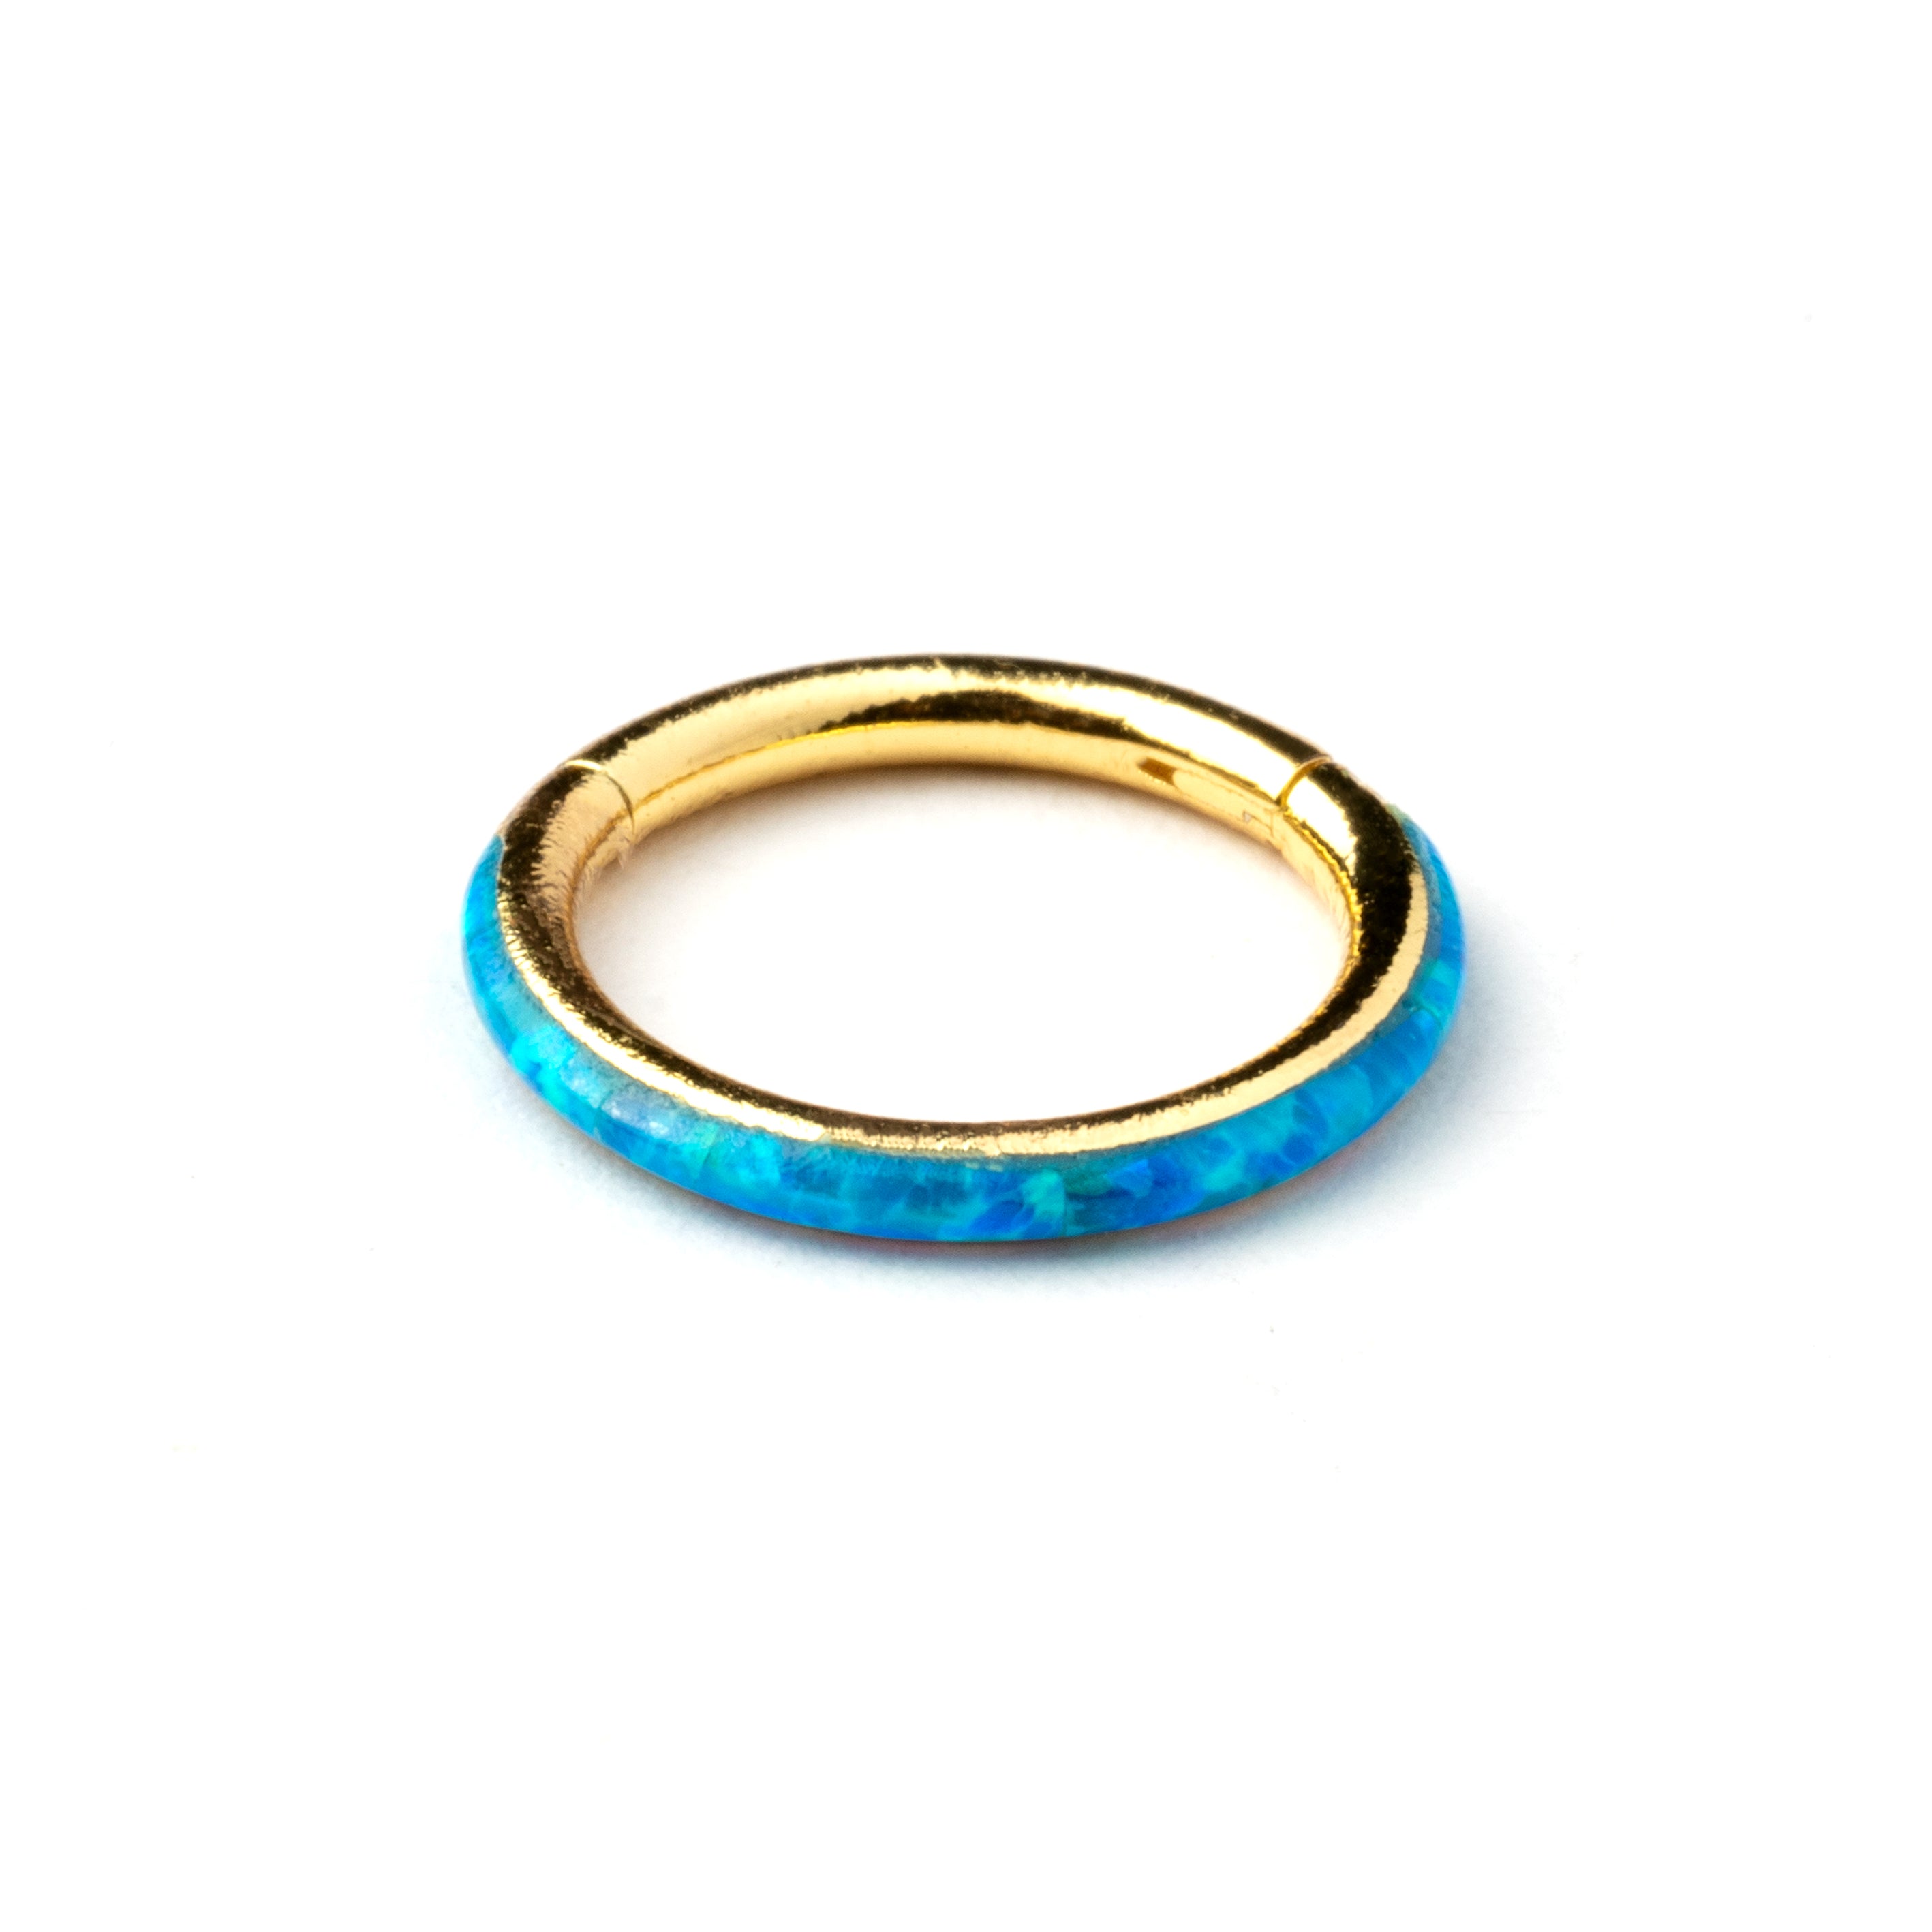 Gold surgical steel septum clicker ring with blue opal inlay frontal view